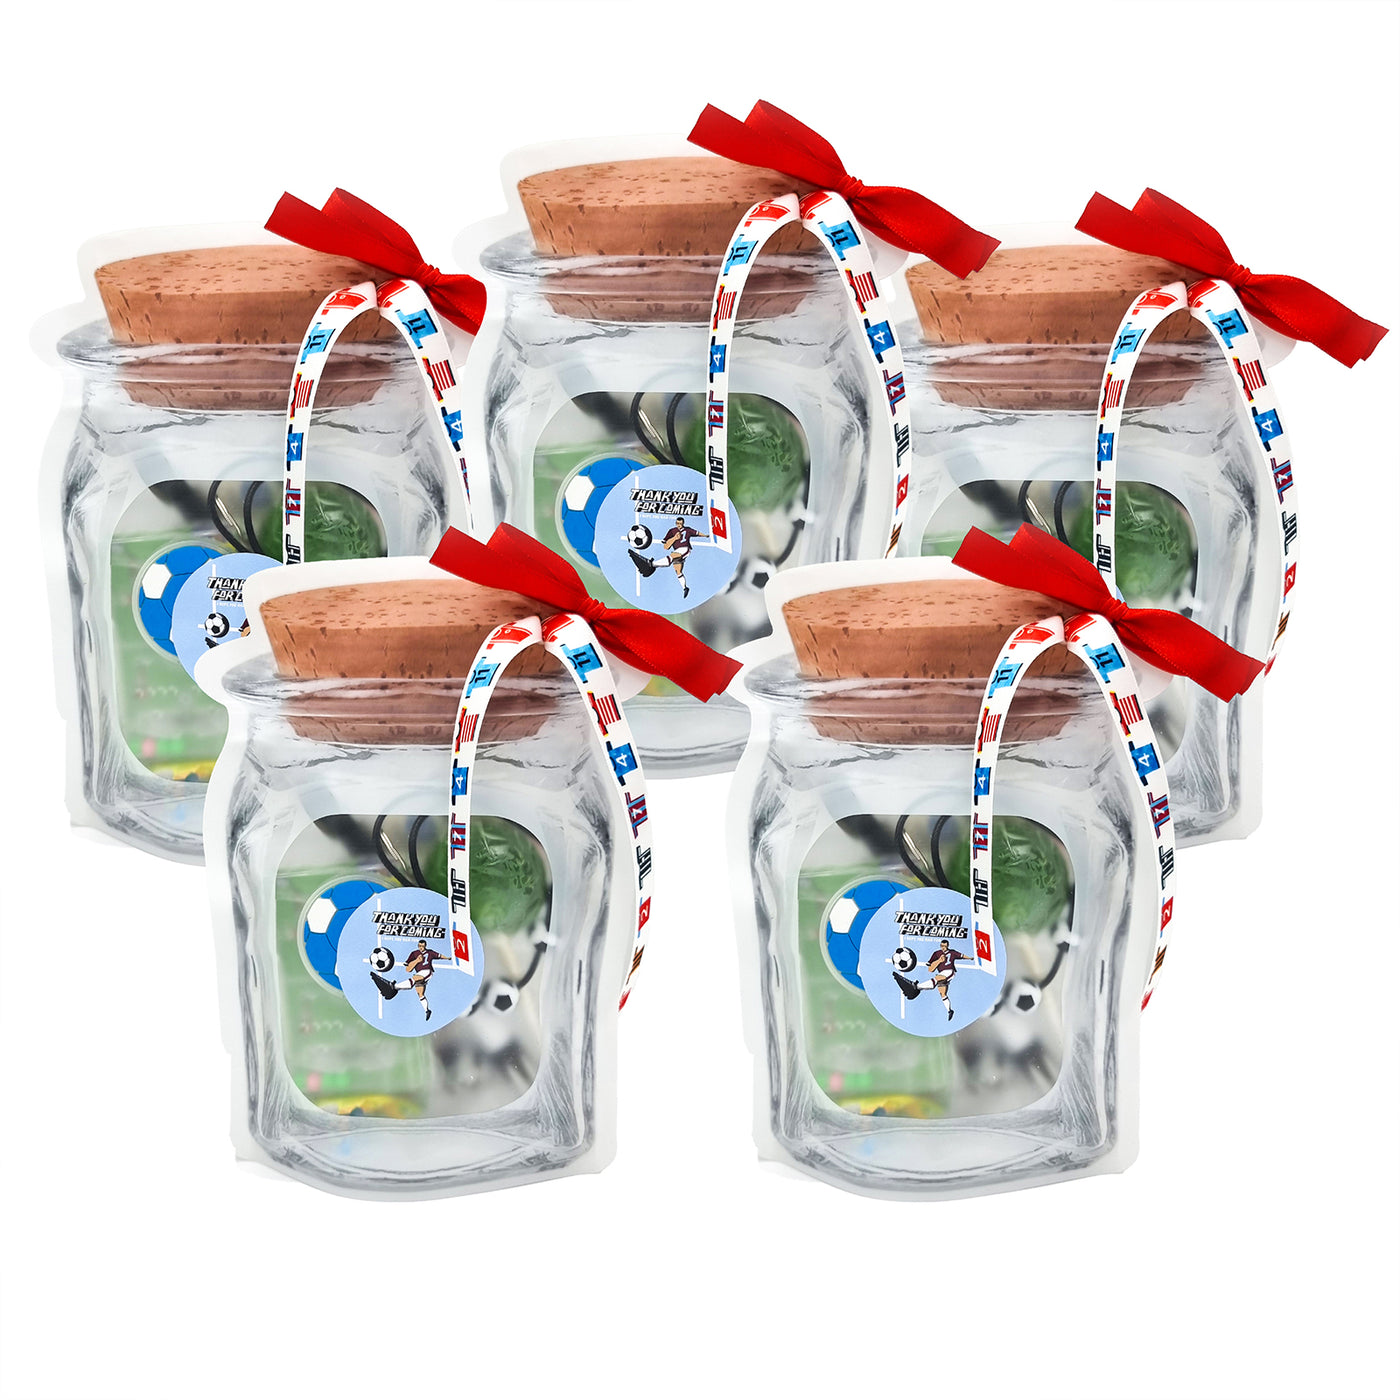 Pre Filled Blue Red Football Birthday Party Goody Bags For Boys, Party Favours With Toys And Candy.